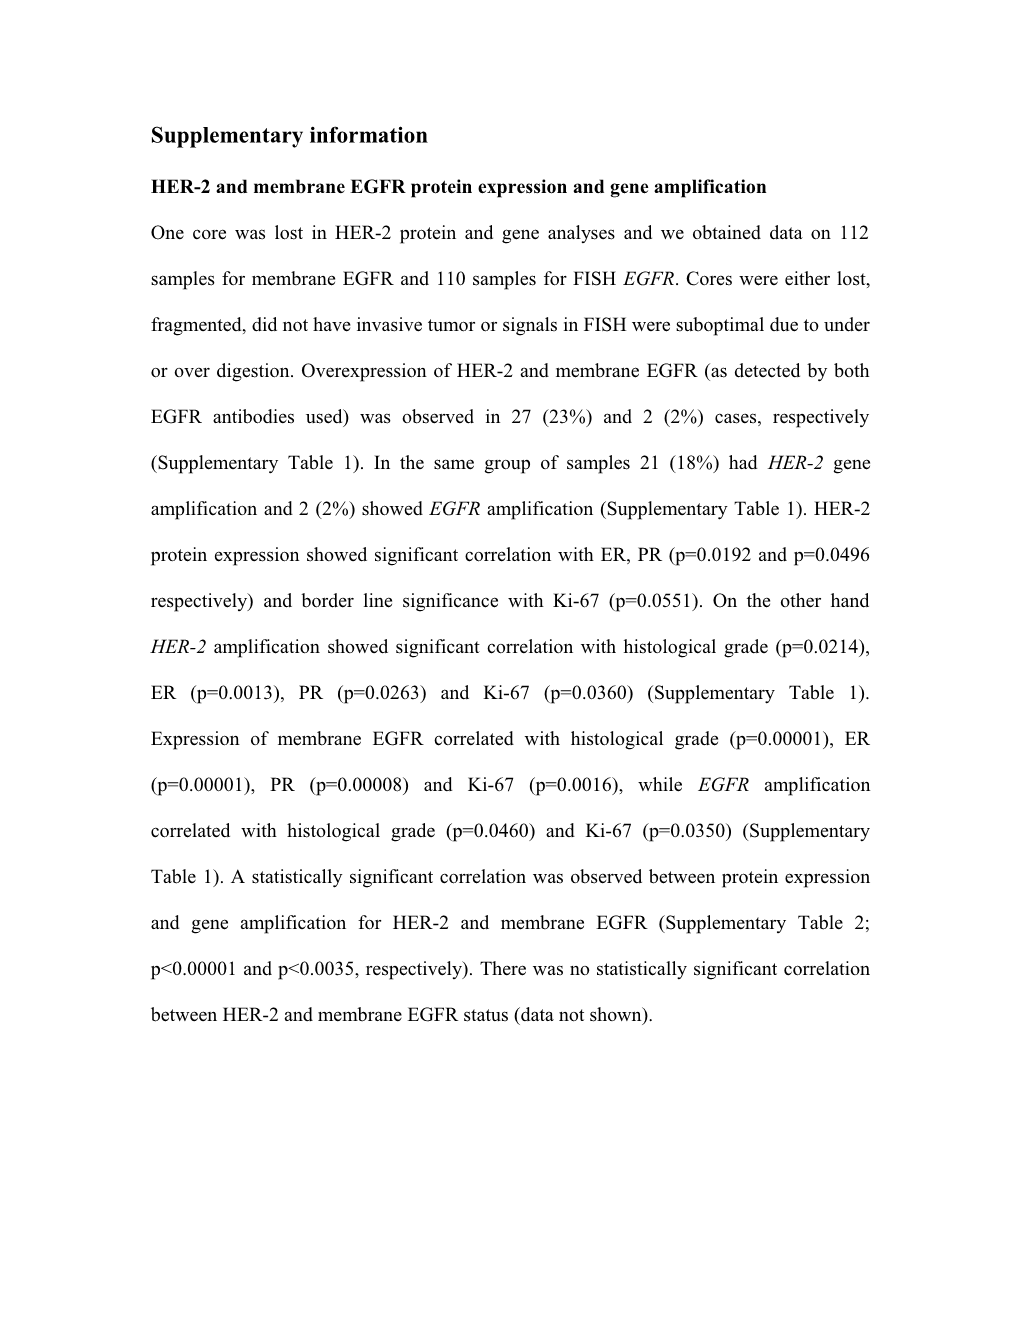 HER-2 and Membrane EGFR Protein Expression and Gene Amplification